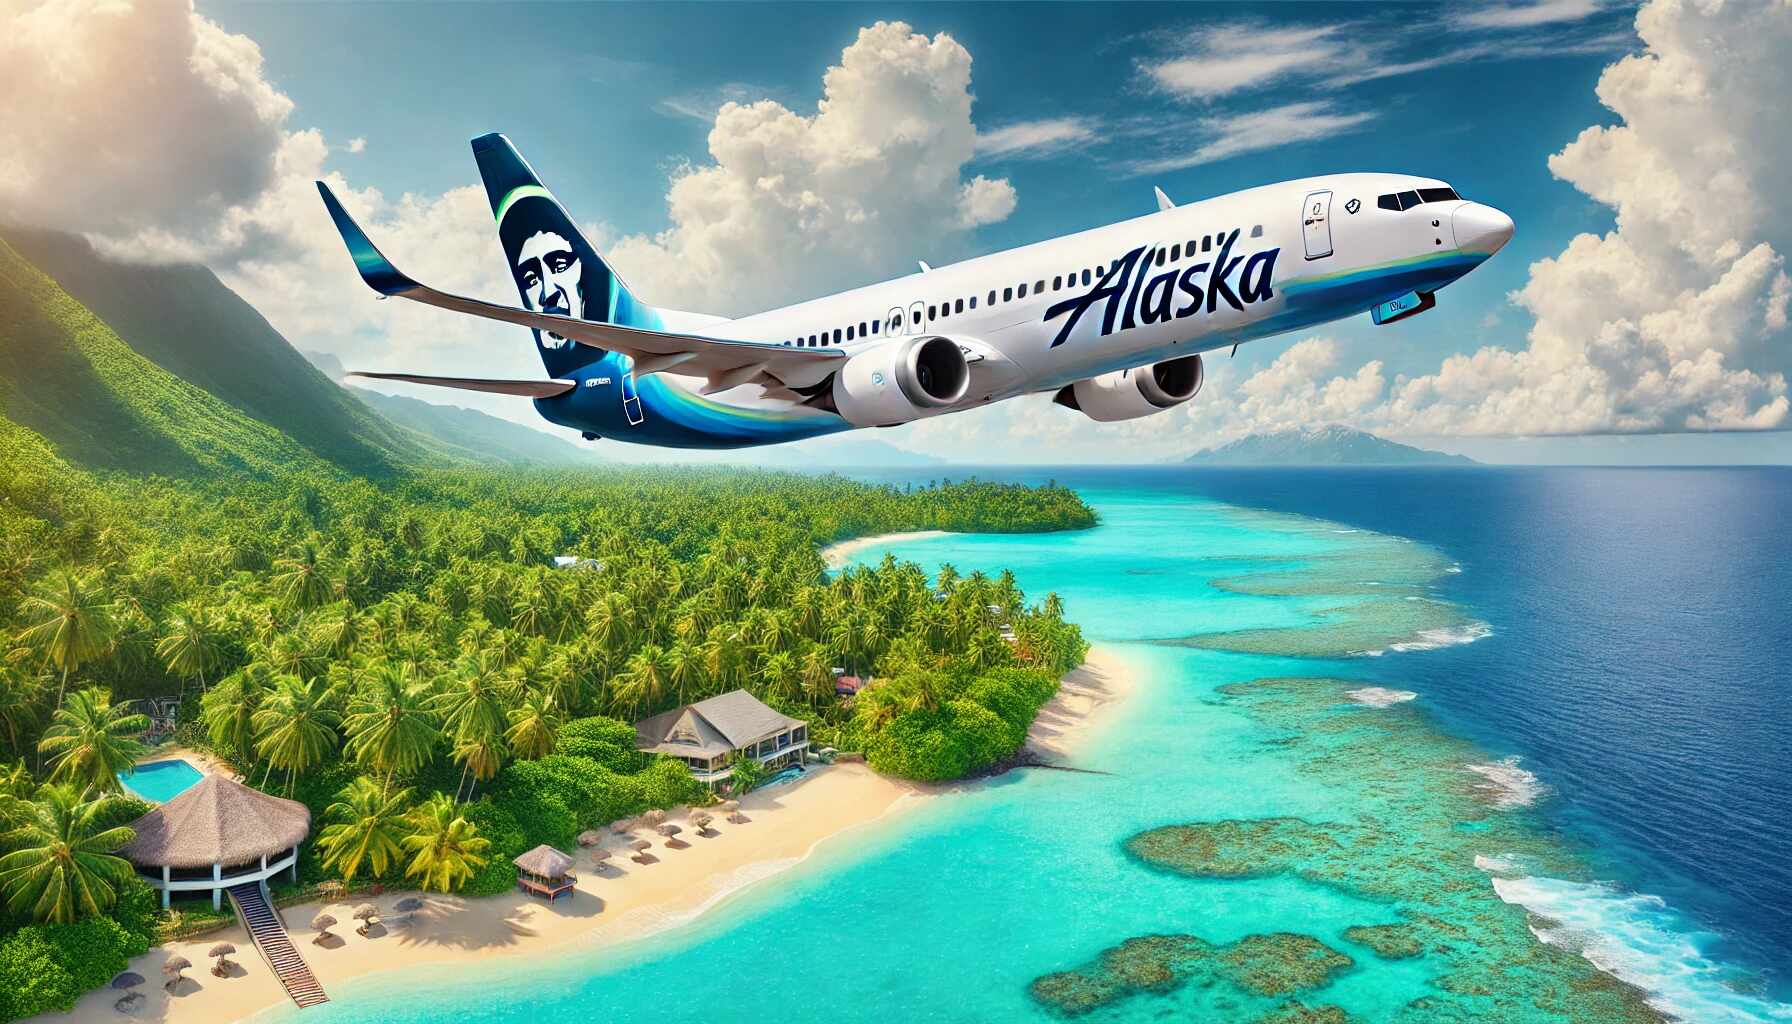 Alaska Airlines Reveals 18 New Winter Routes to Boost Tourism including New York, San Diego, Kansas, Los Angeles – Travel And Tour World